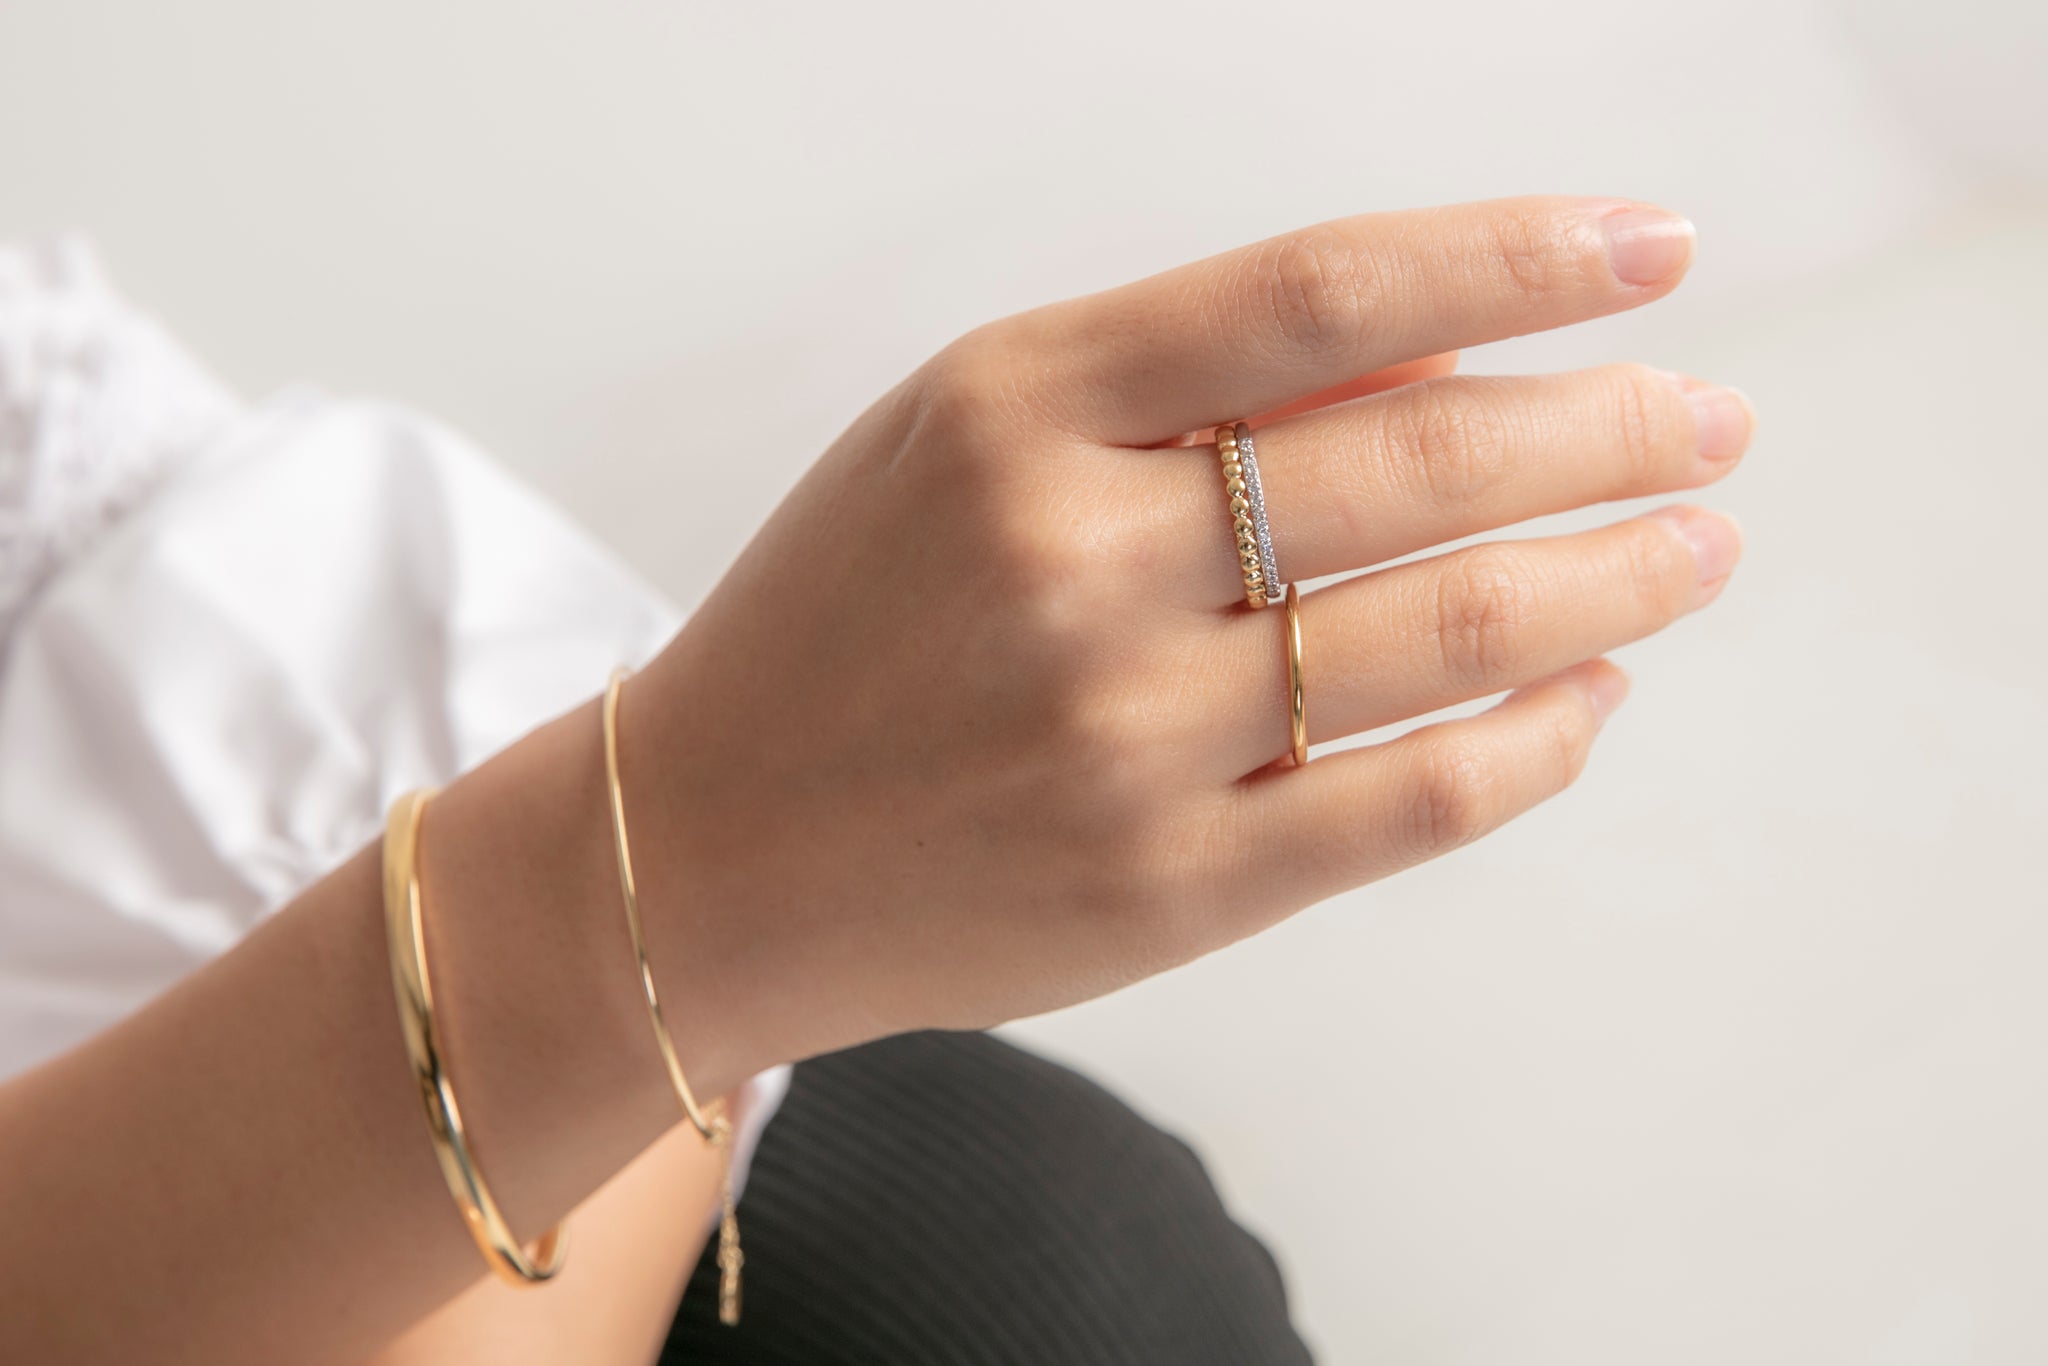 What You Need to Know If Cheap Jewelry Breaks You Out